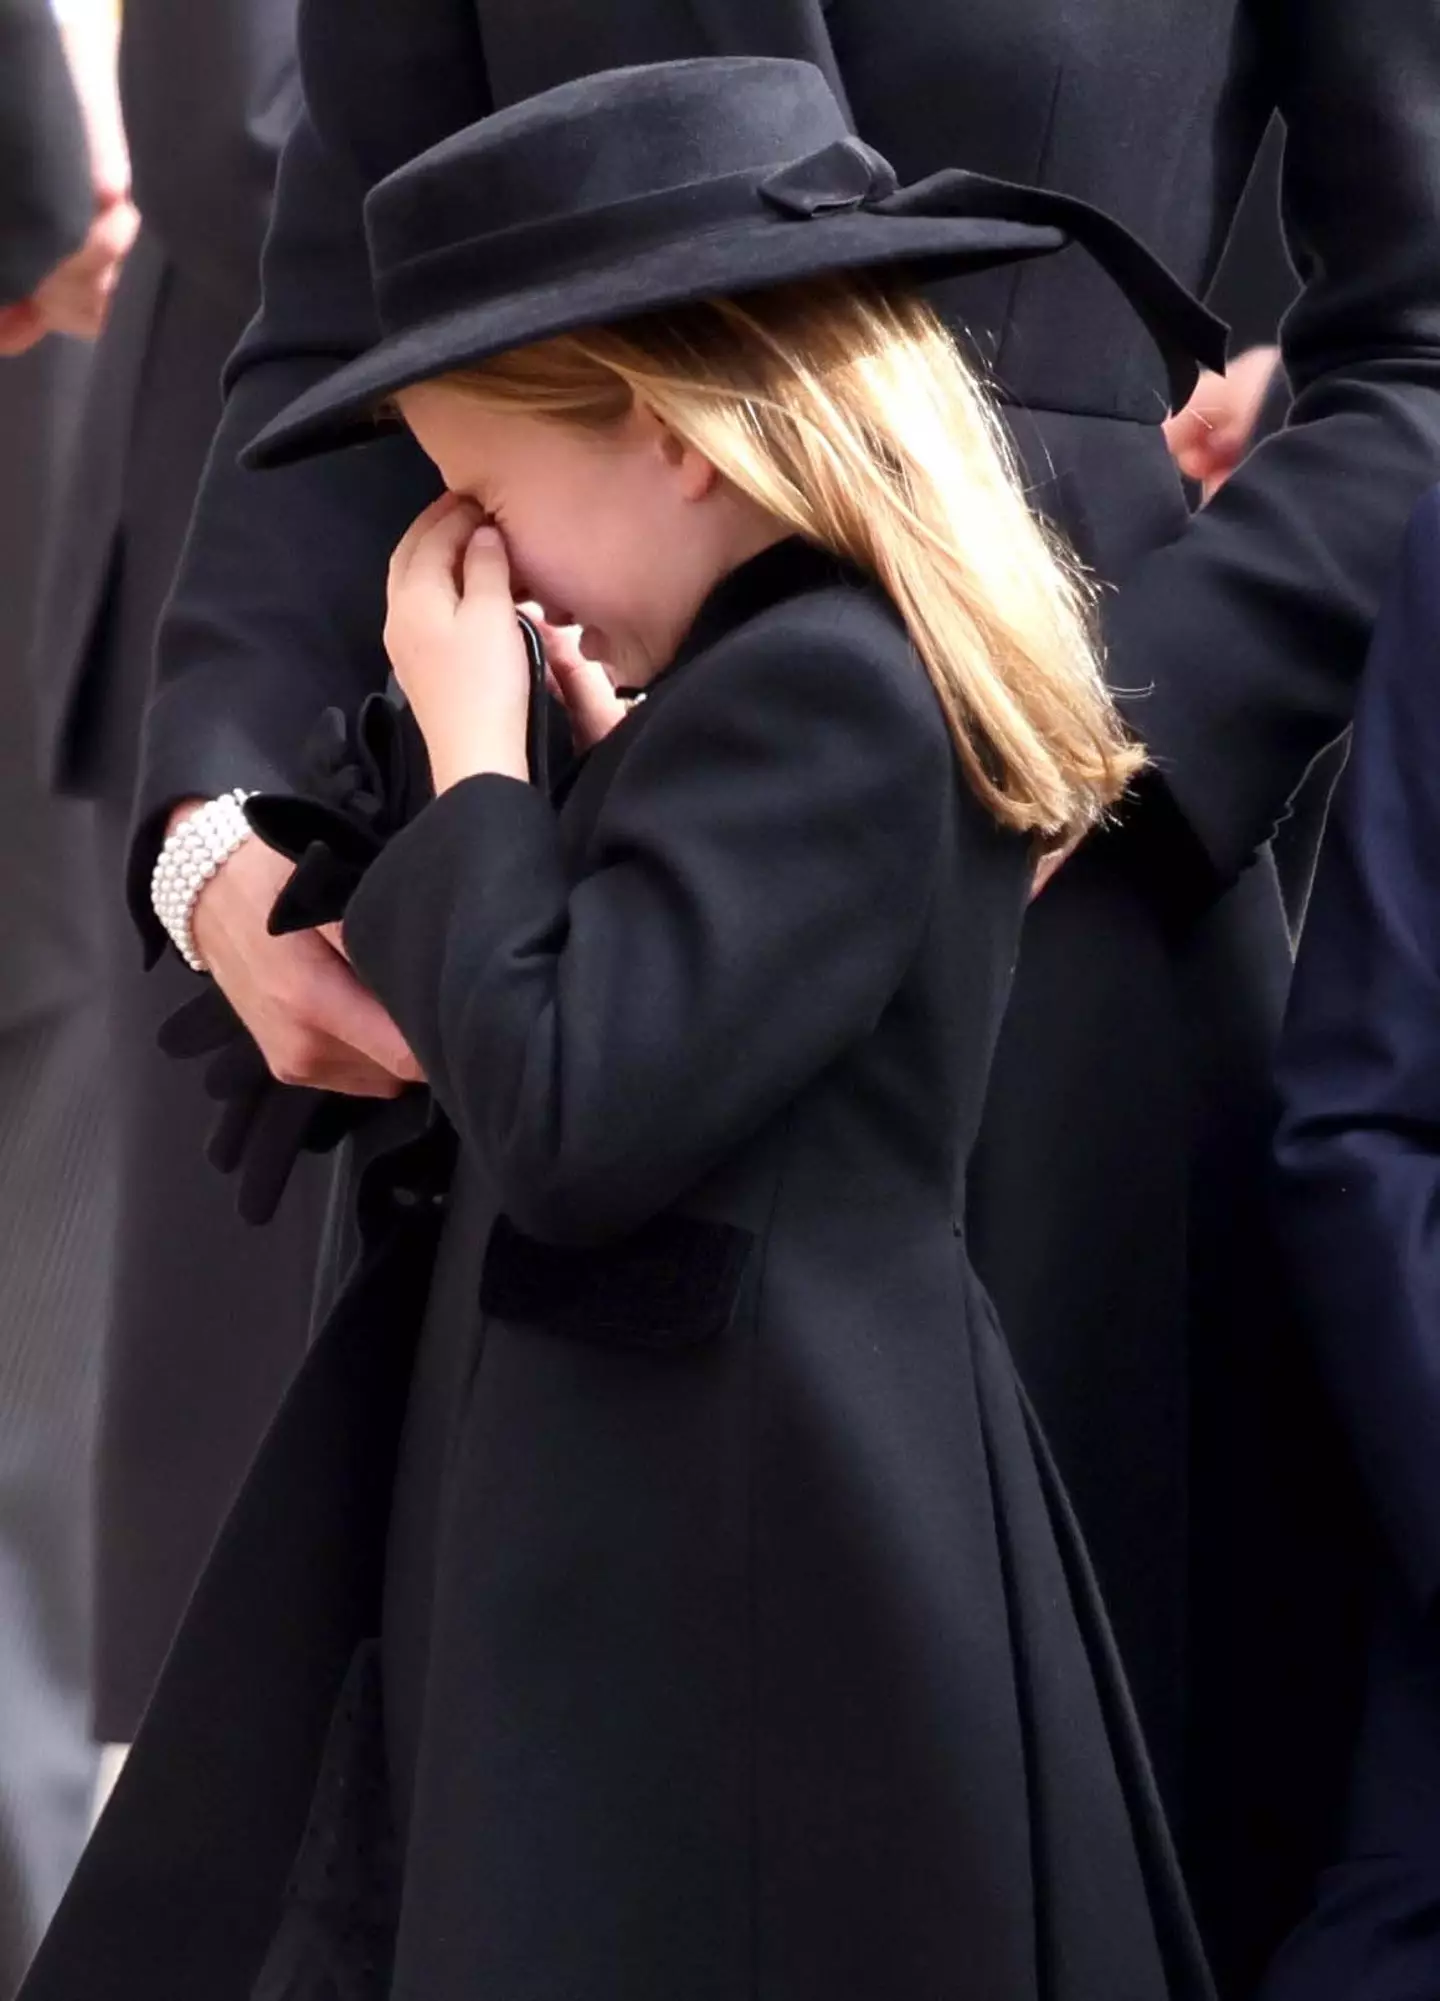 Princess Charlotte bravely followed her great-grandmother's coffin today.